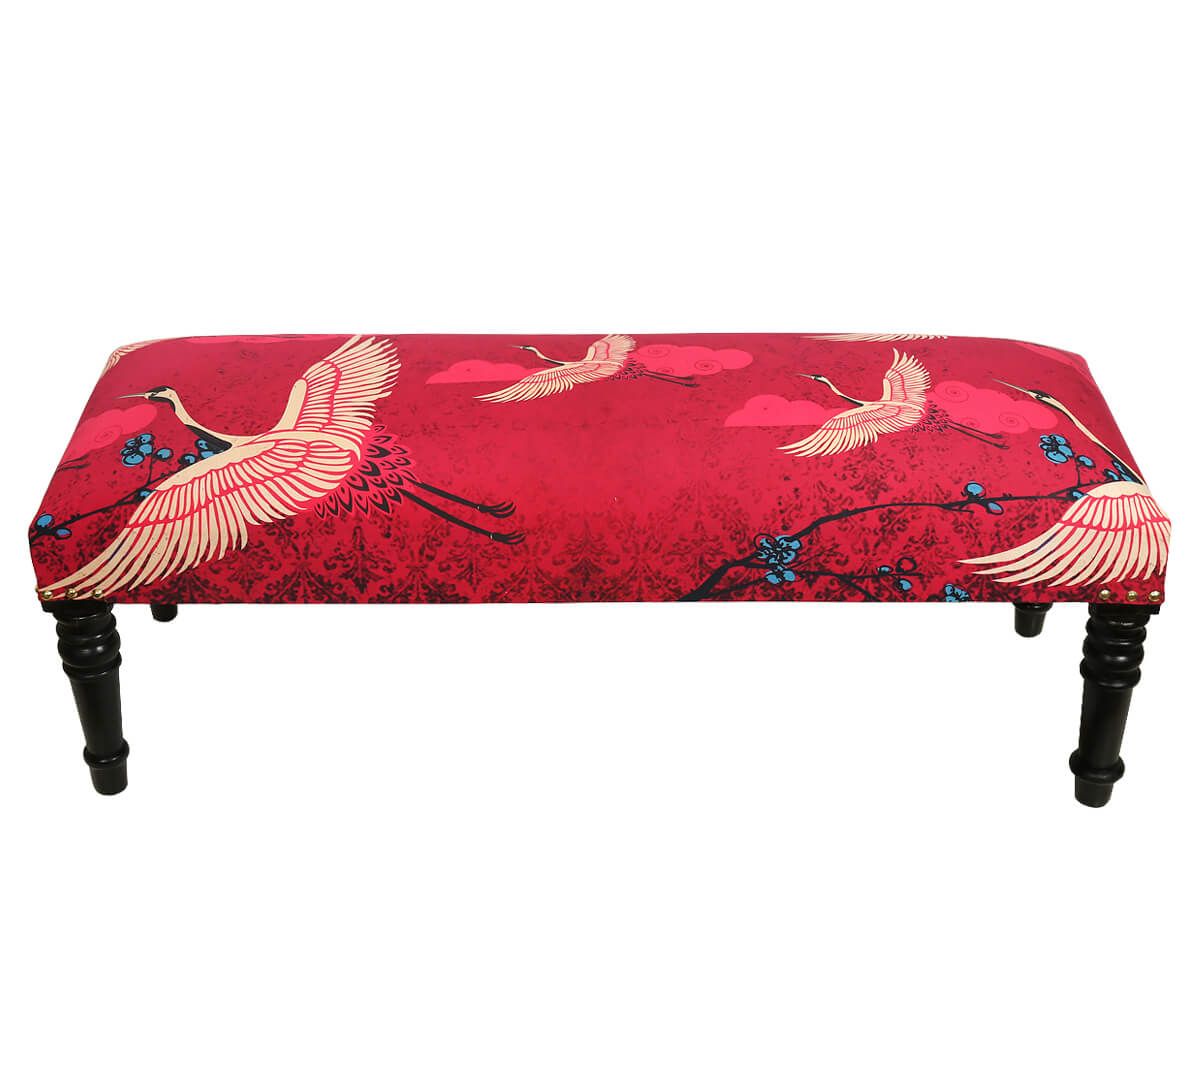 India Circus Legend of the Cranes Wooden Bench